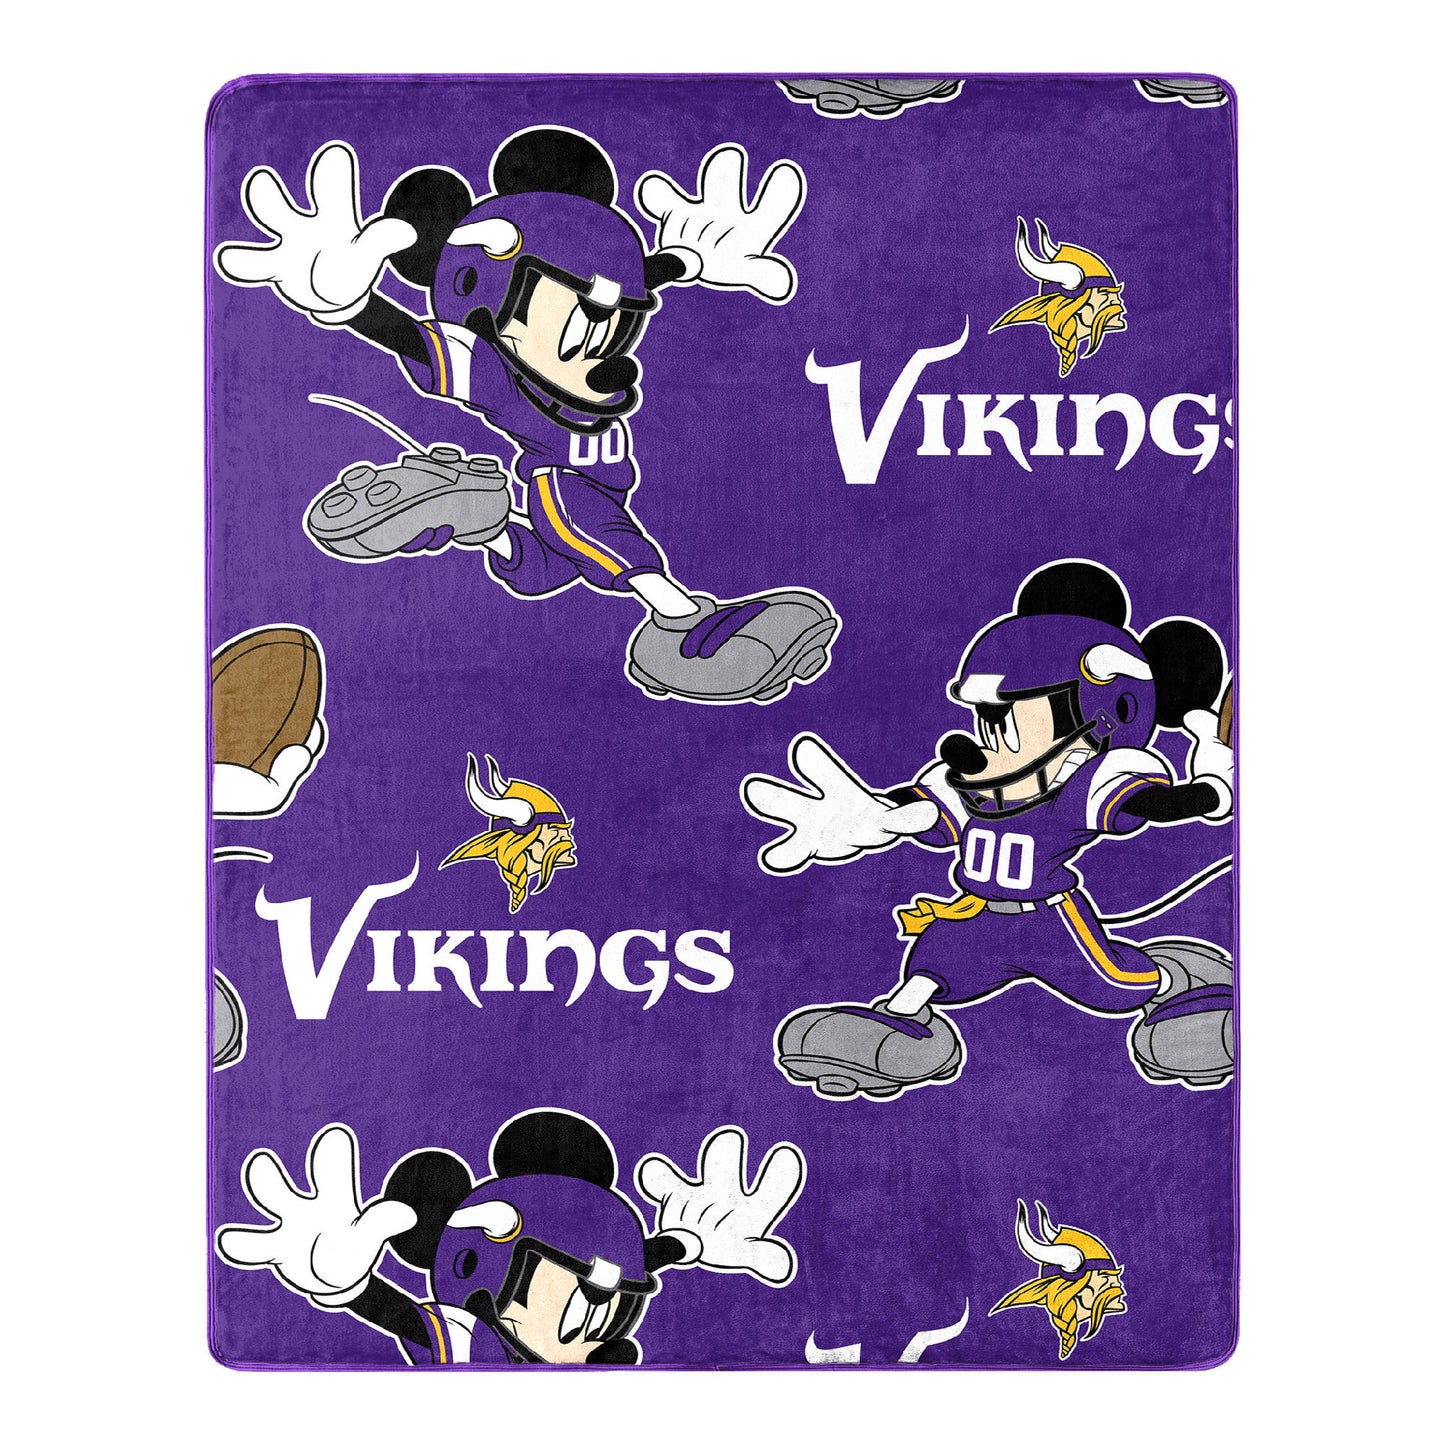 Vikings OFFICIAL NFL & Disney's Mickey Mouse Character Hugger Pillow & Silk Touch Throw Set;  40" x 50"